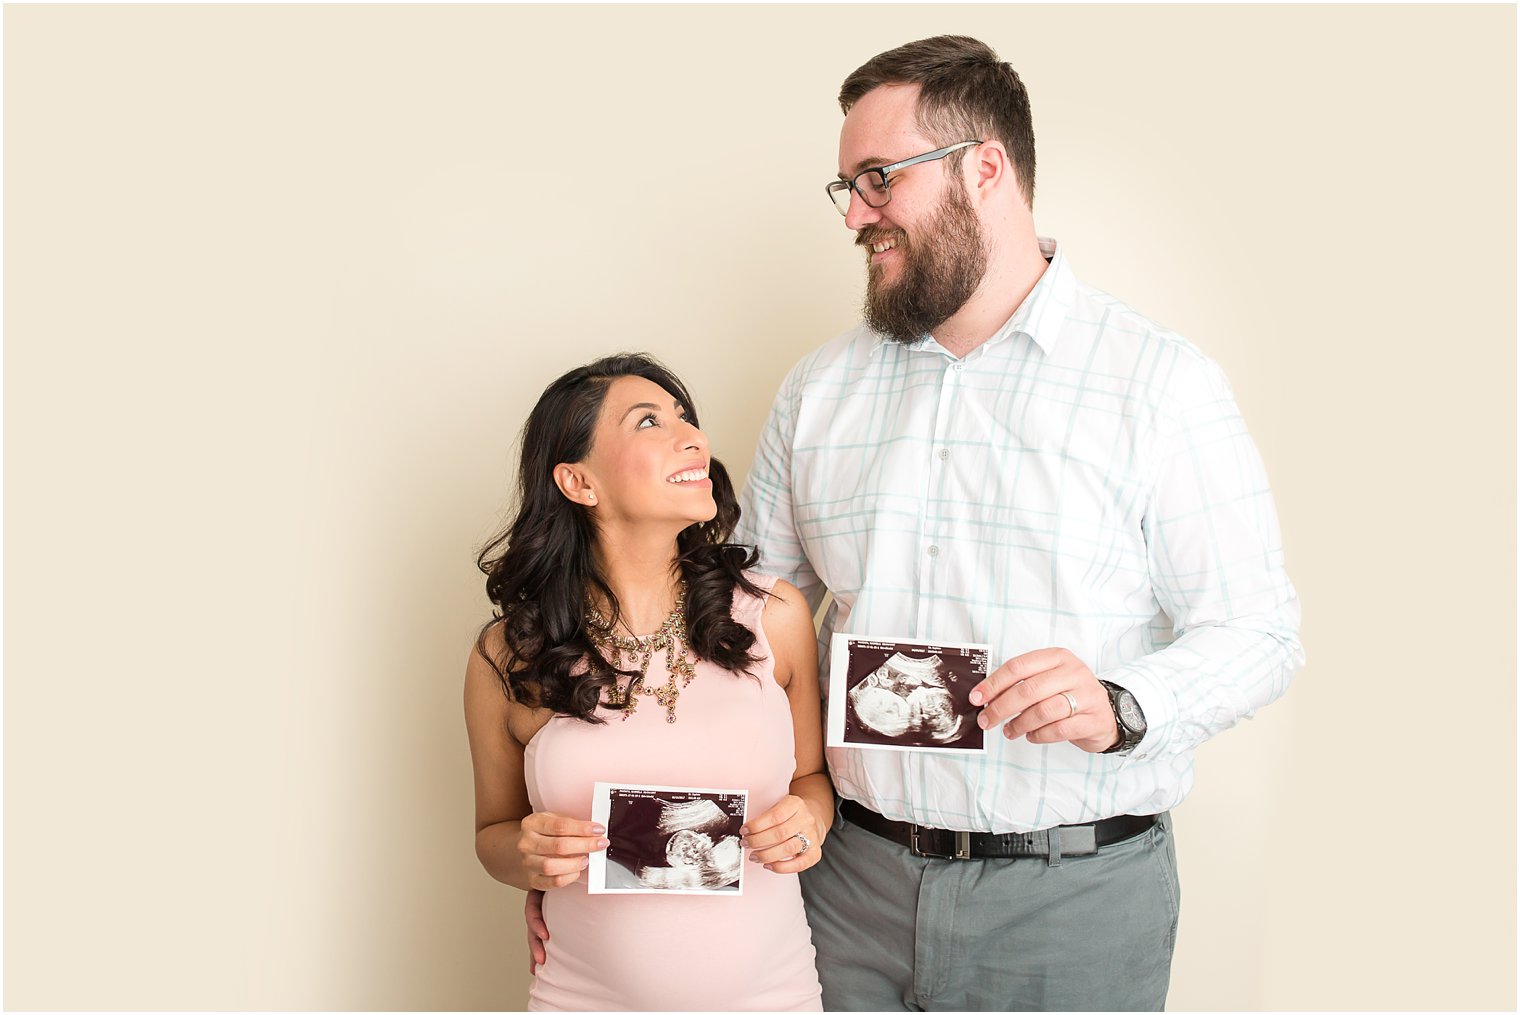 Pregnancy announcement ideas with ultrasounds | Photo by Idalia Photography